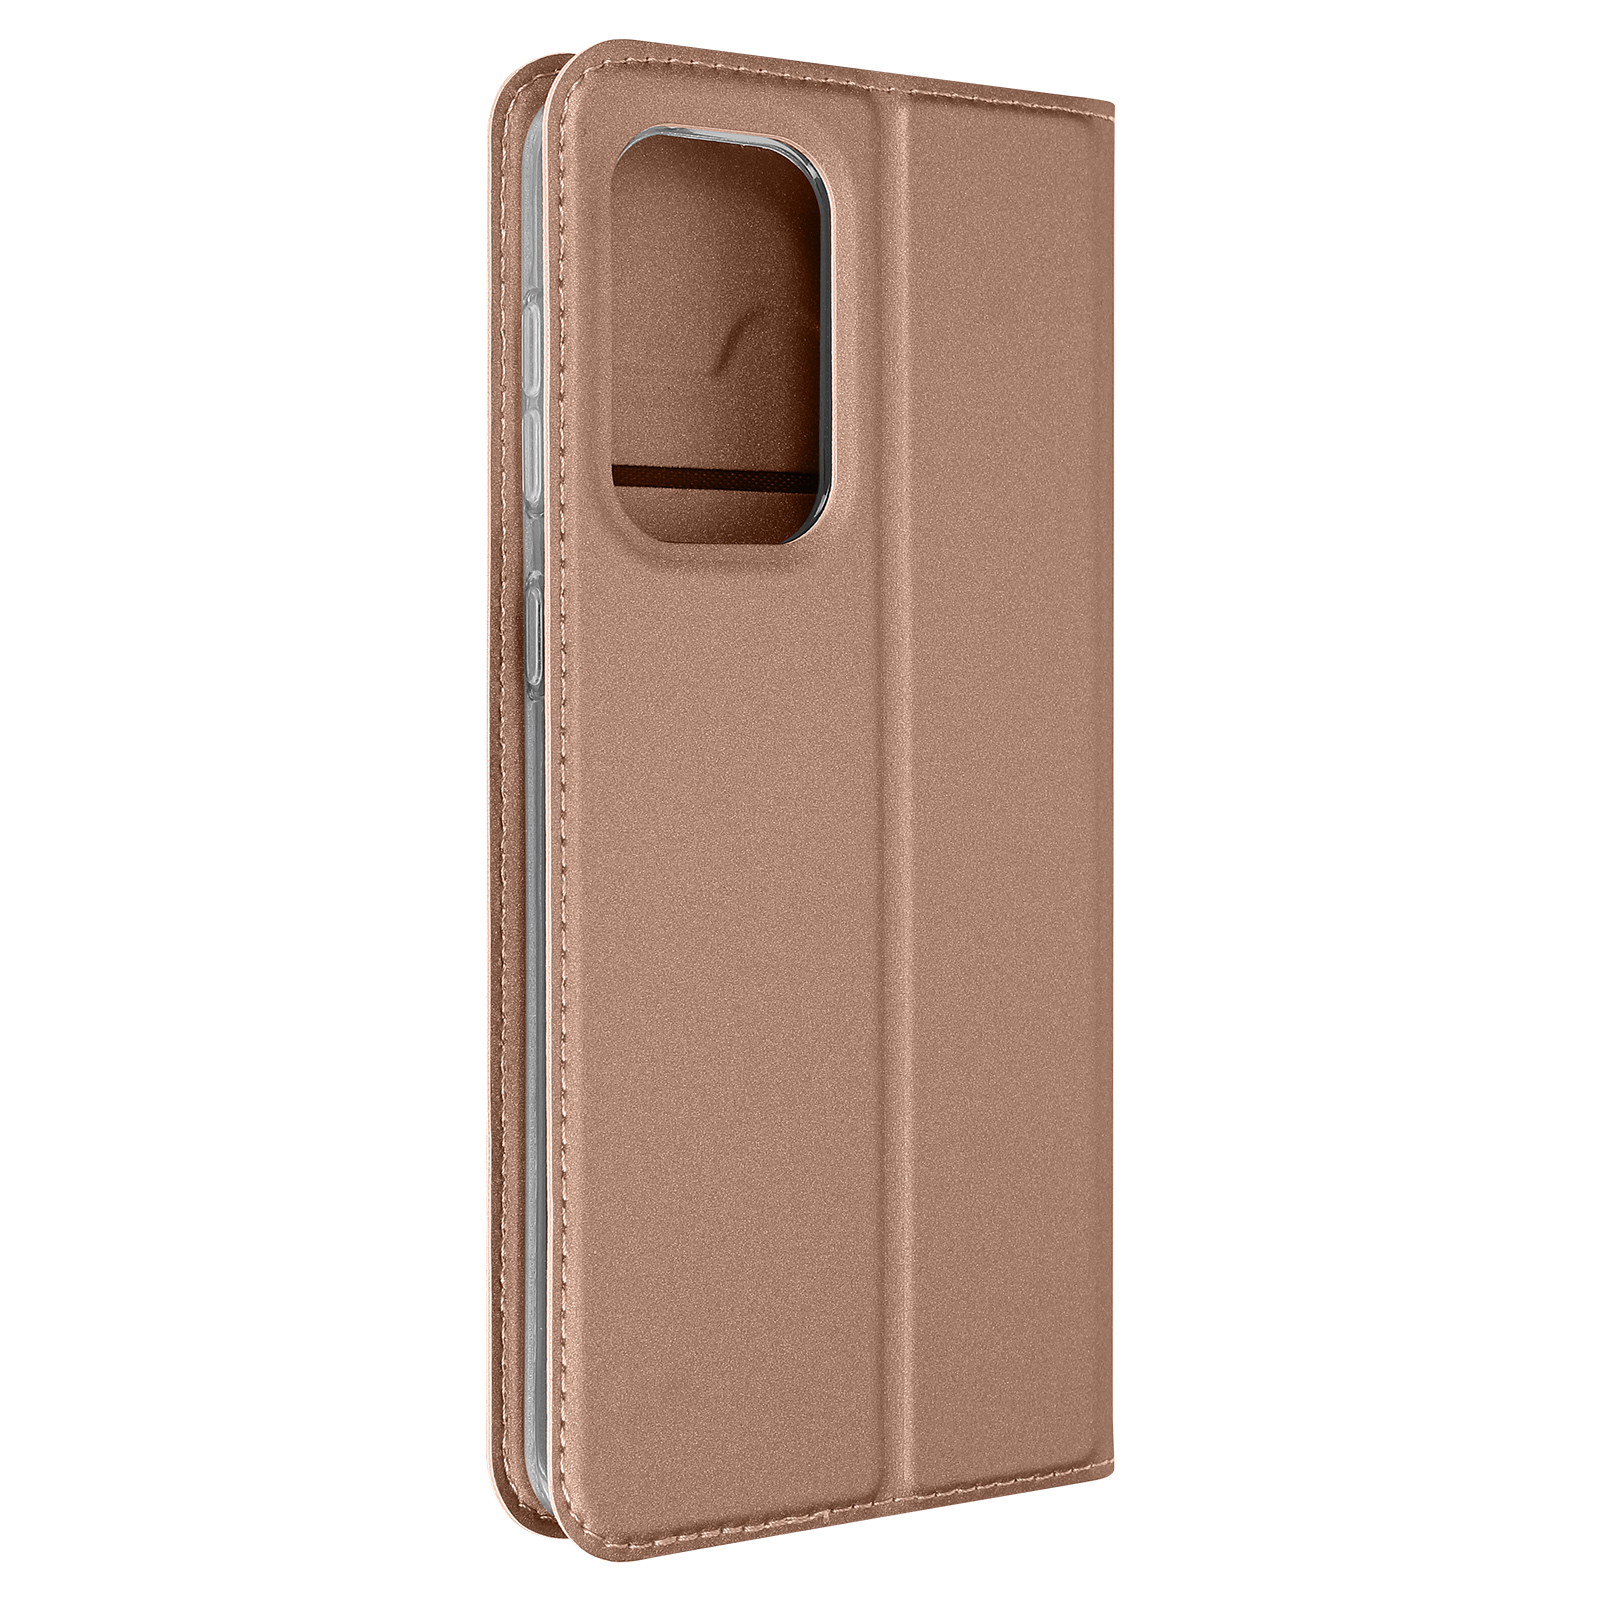 DUX A33 Samsung, Bookcover, Rosegold 5G, Galaxy DUCIS Pro Series,